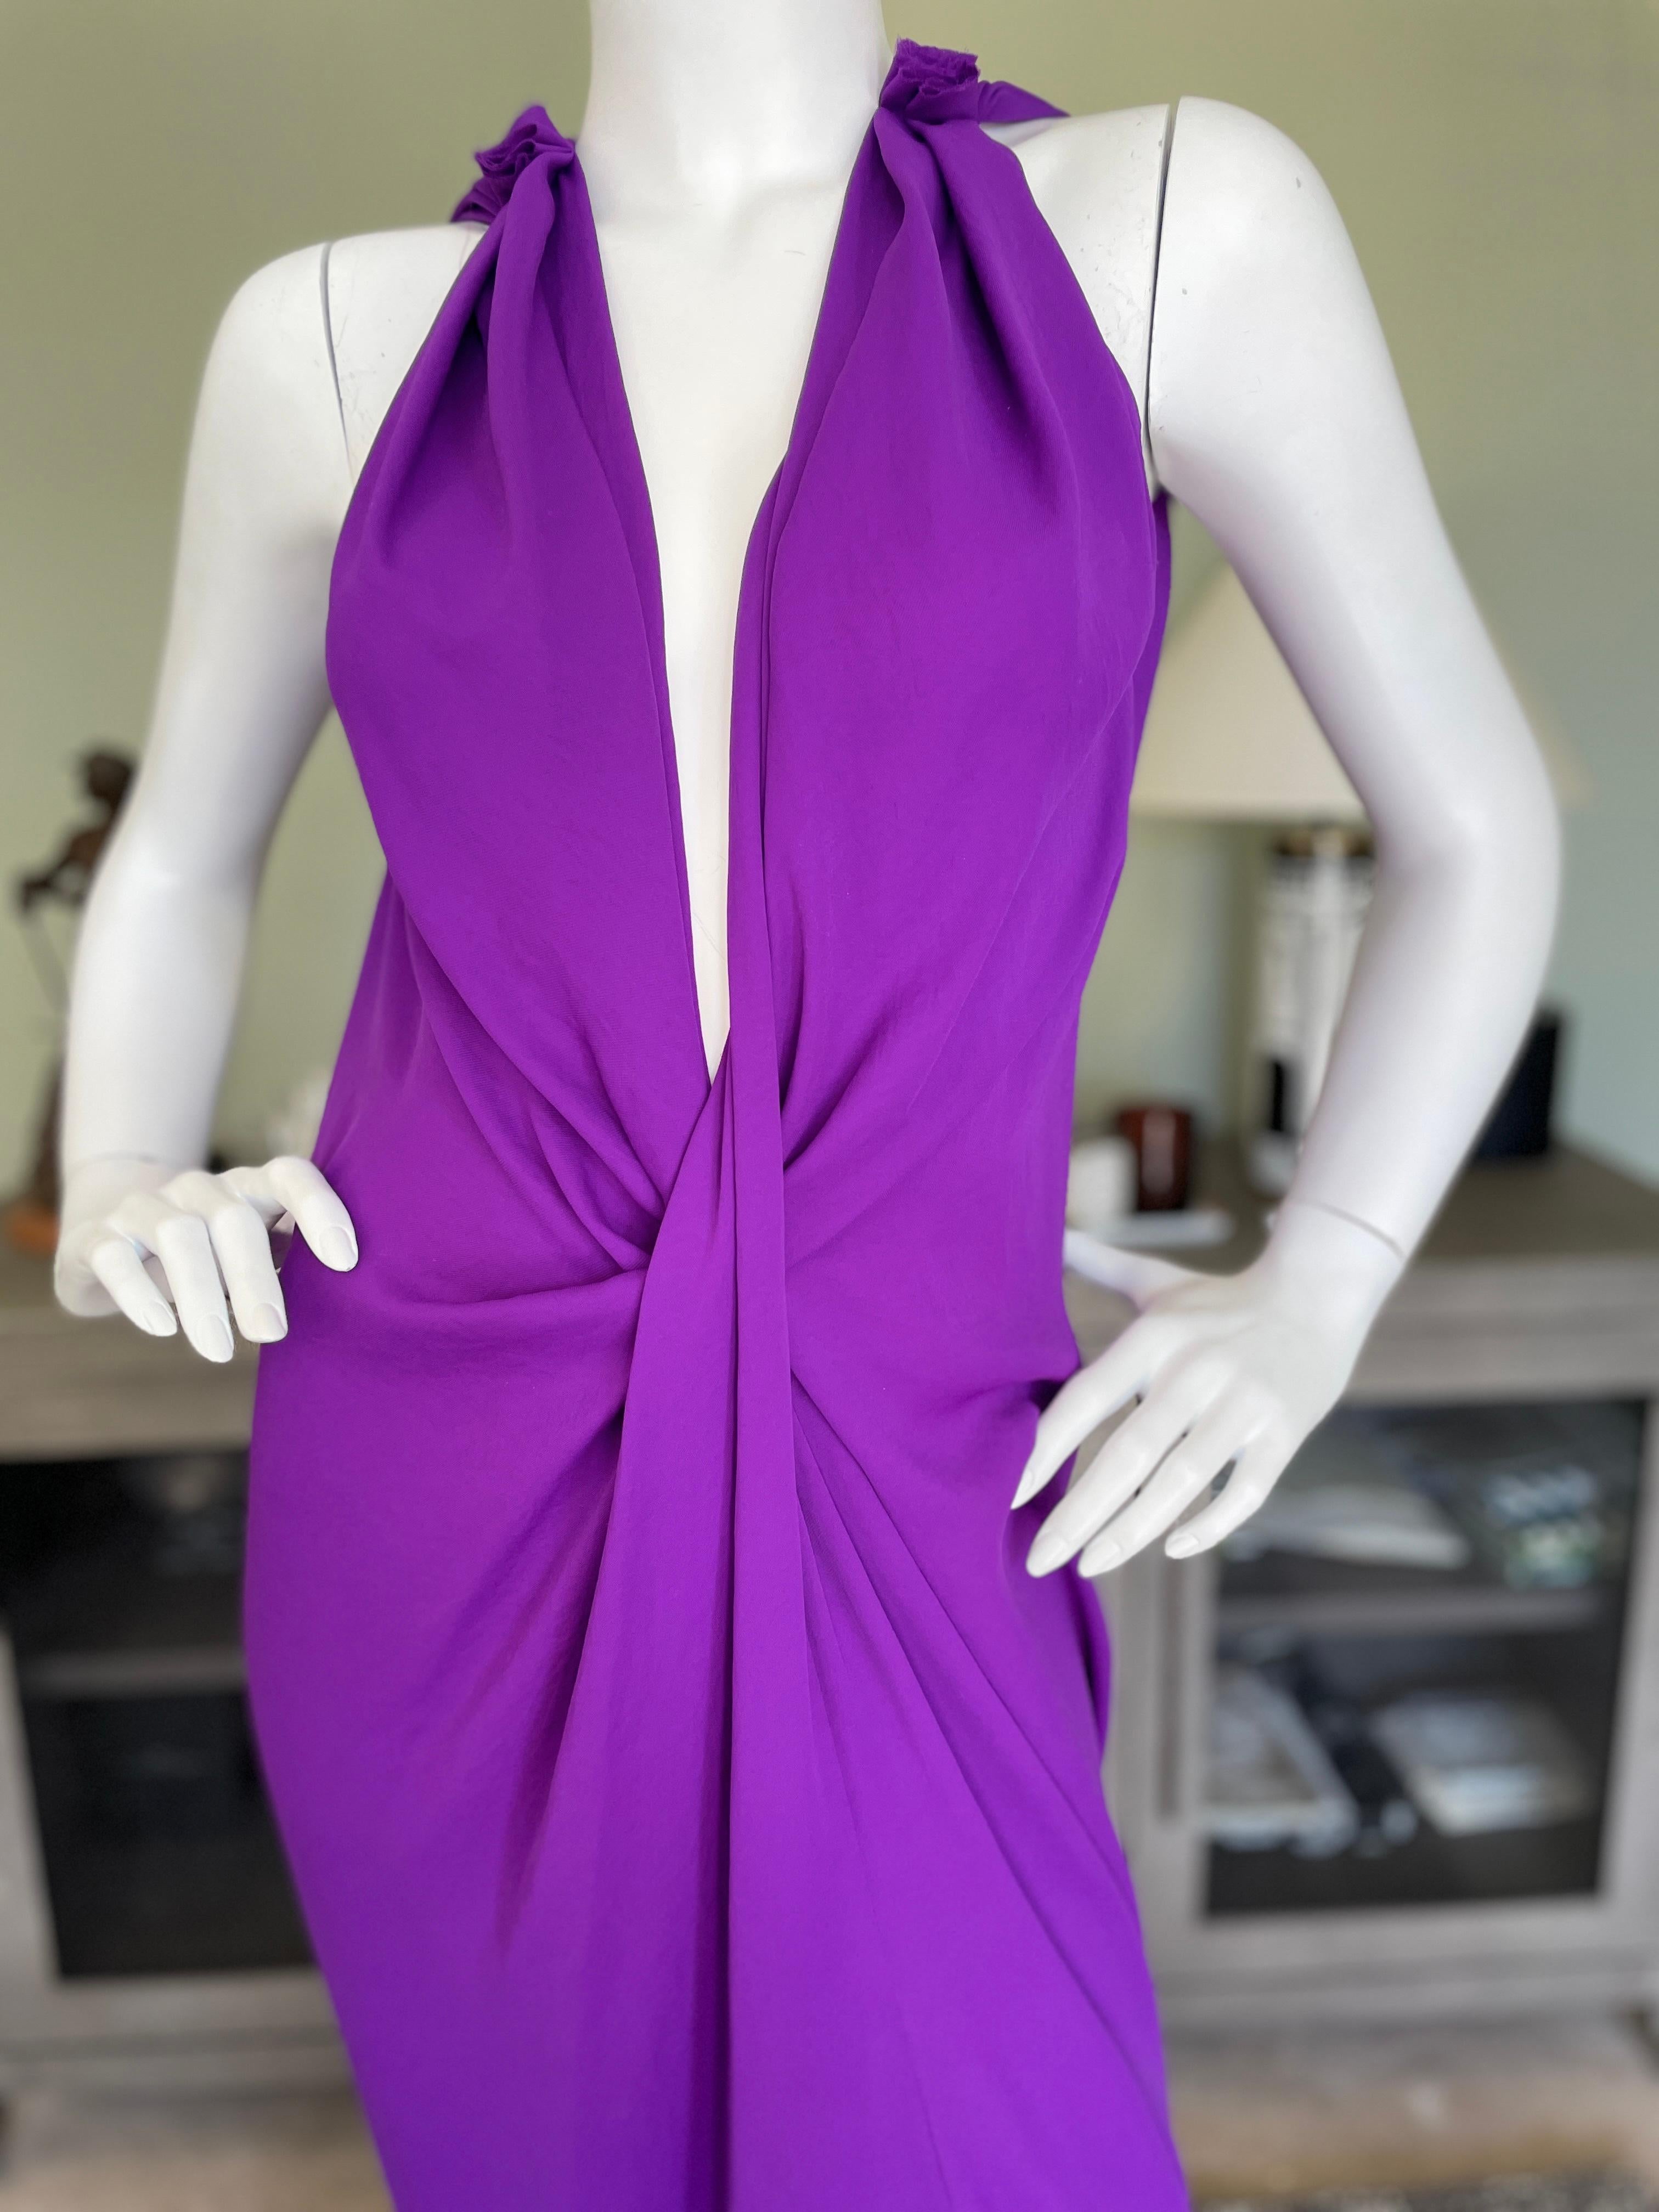 Women's  Lanvin by Alber Elbaz 2014 Plunging Purple Evening Dress with High Slit For Sale